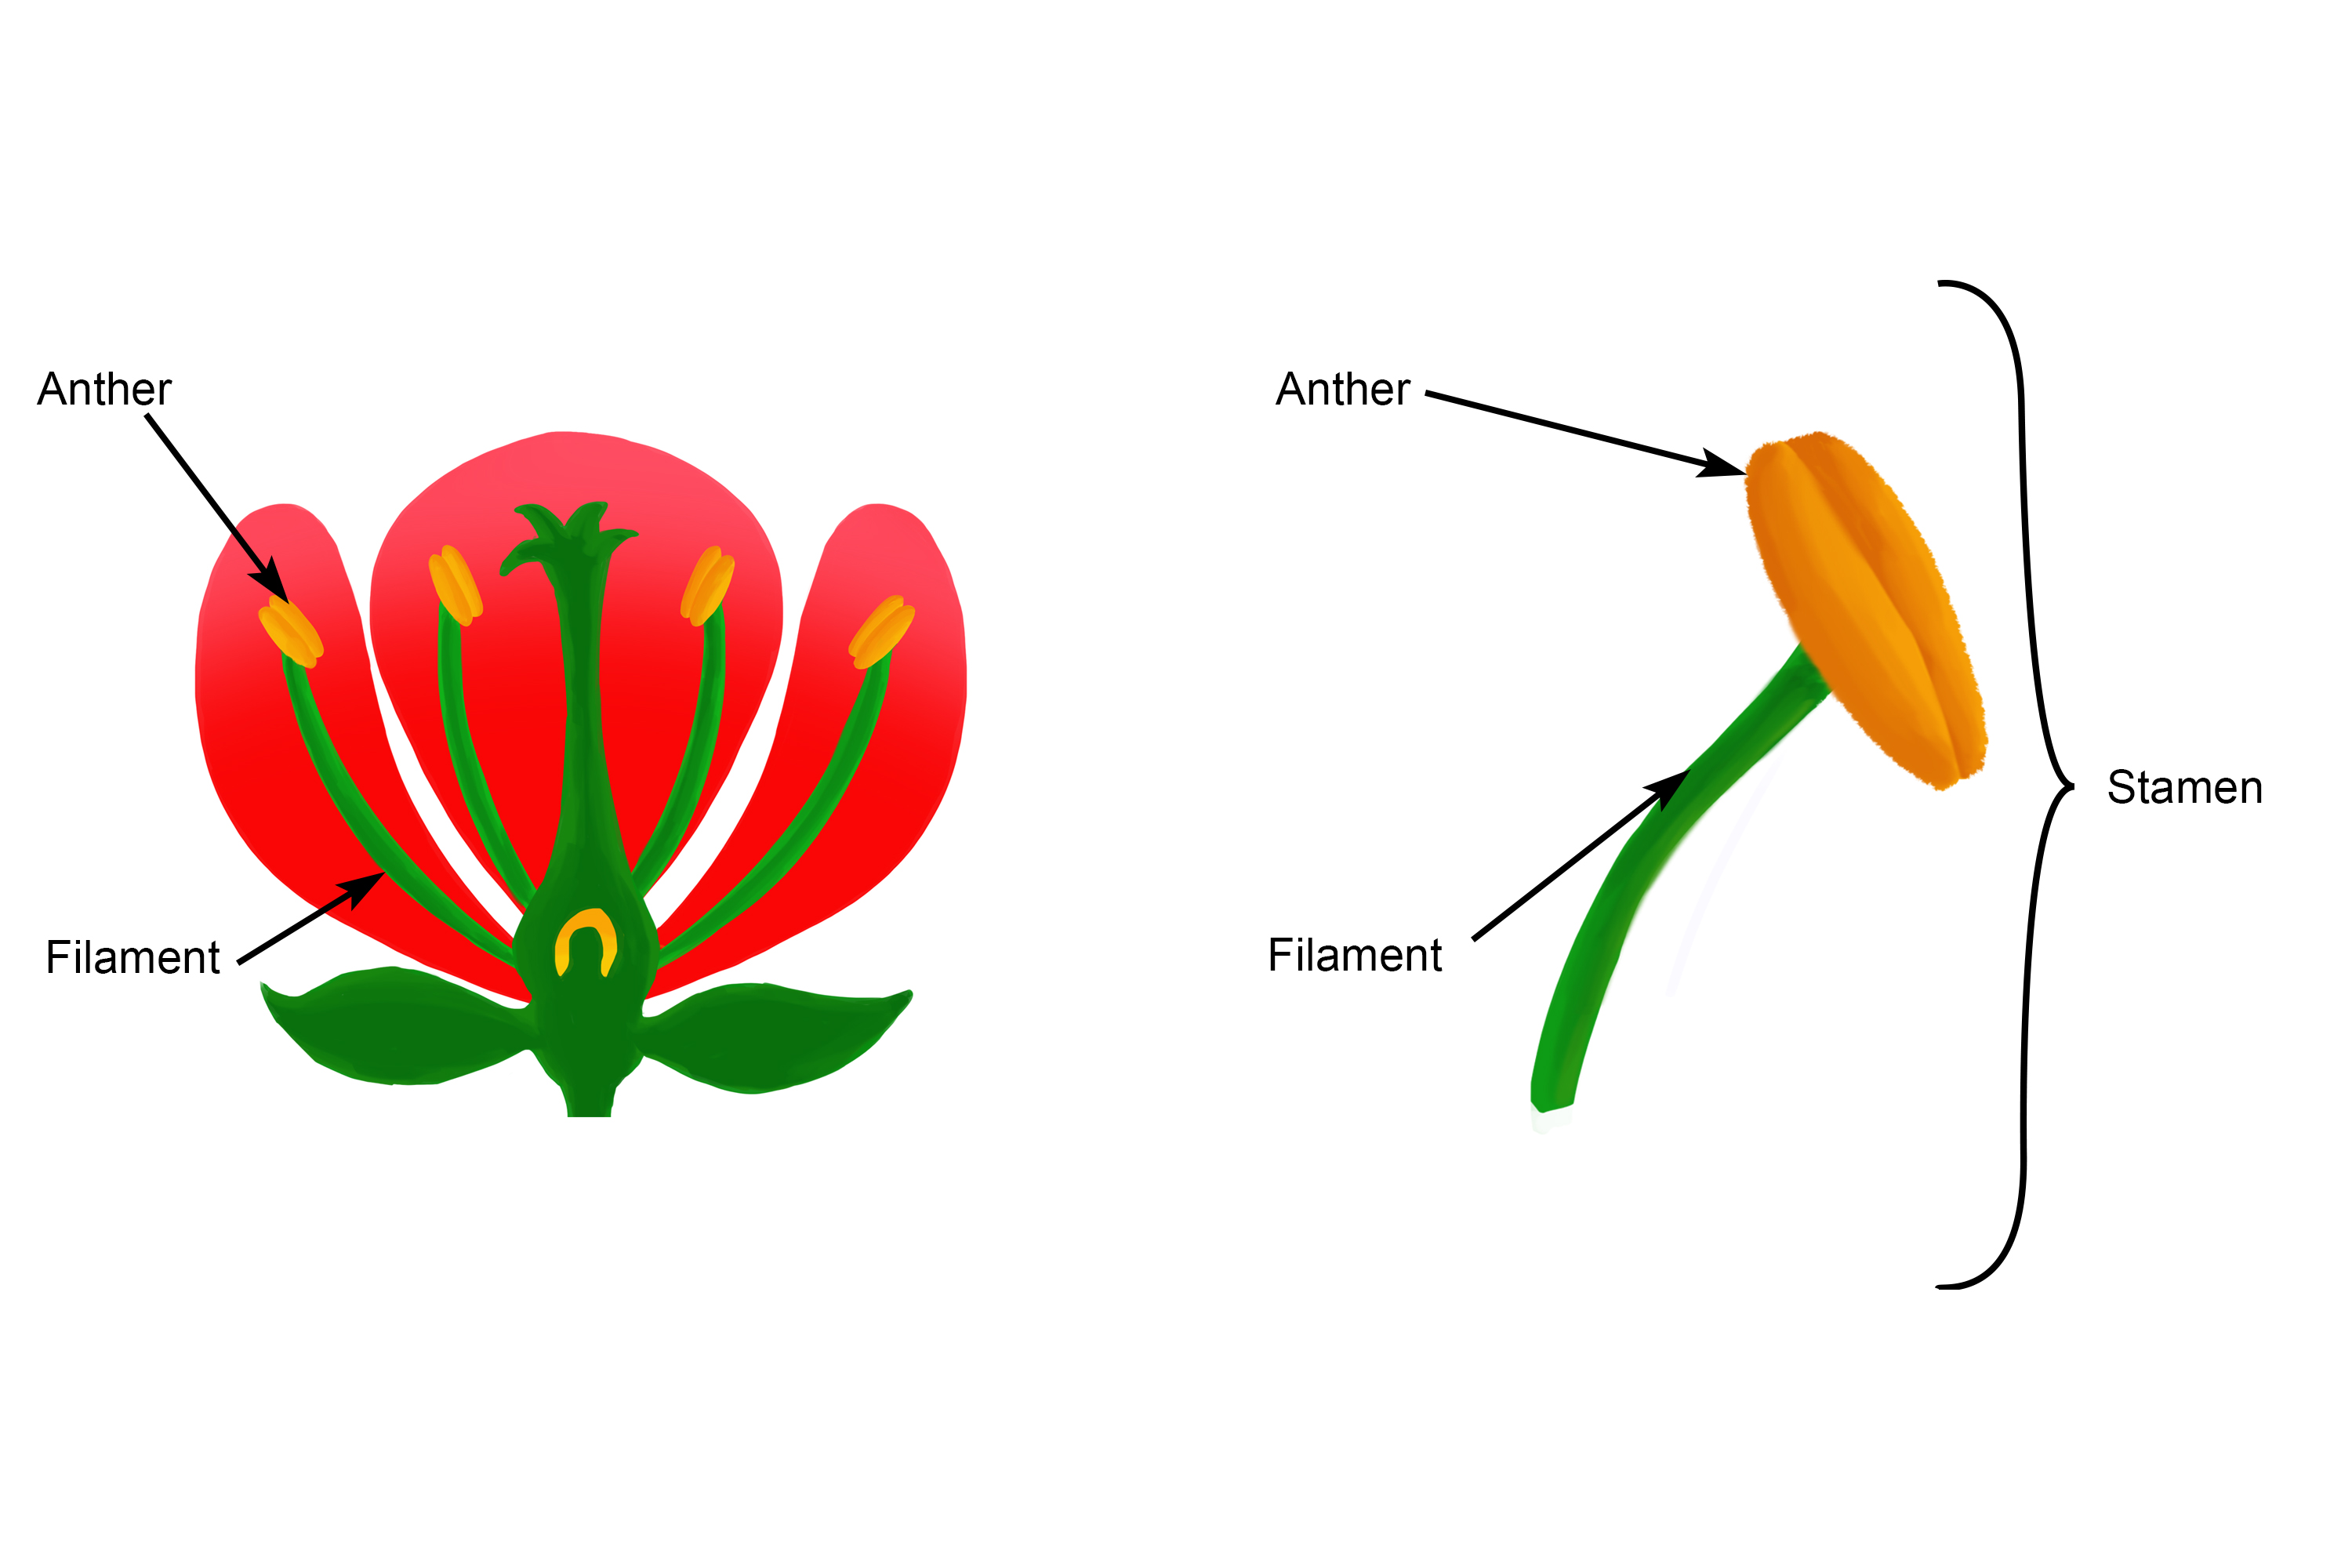 The anther is part of the male reproductive organ that is part of the stamen